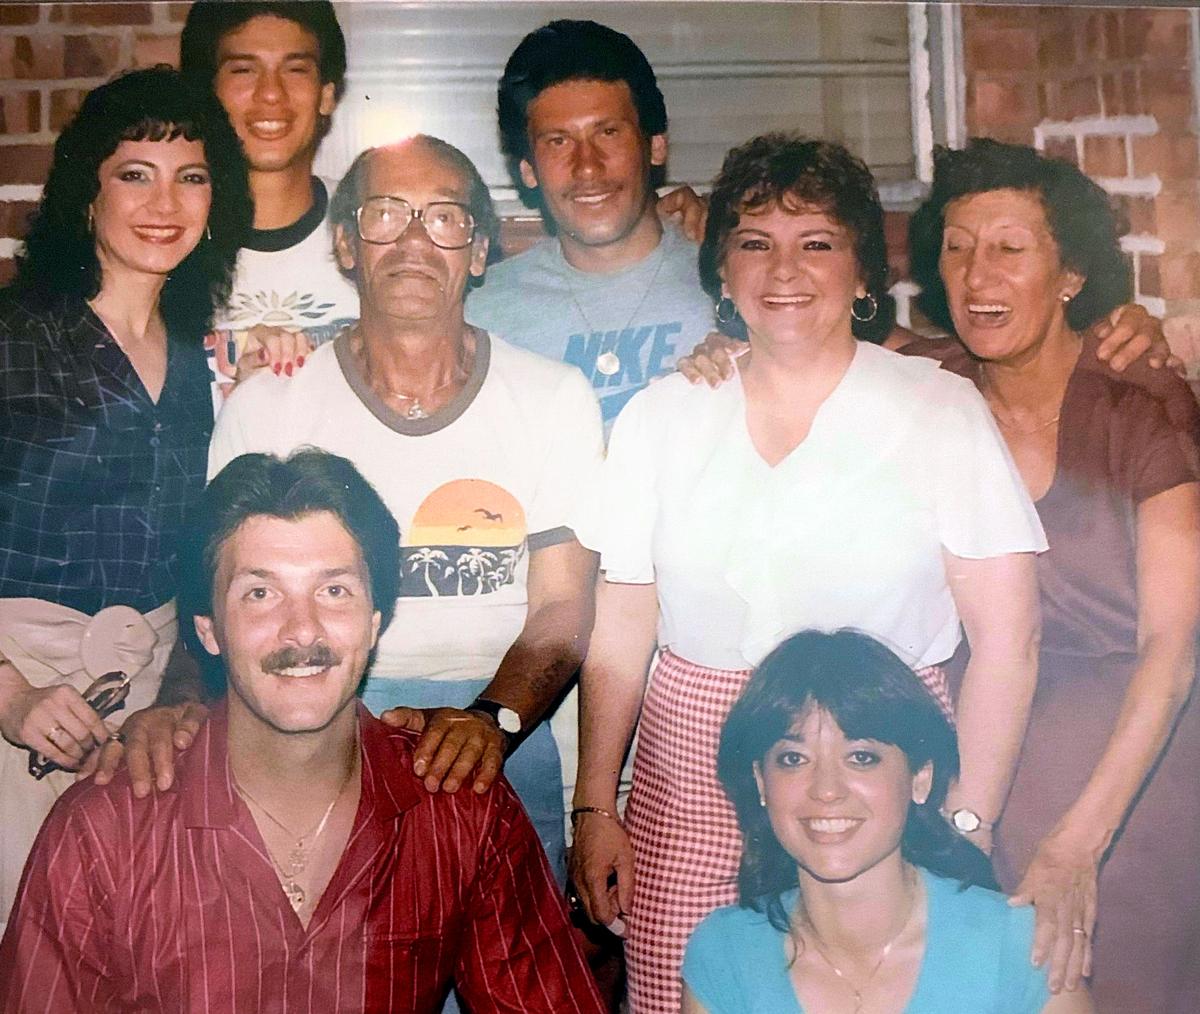 Joseph Sedacca and his family in a photo taken in the mid-80s in Queens, NY: (Top Row, Left to Right) Janice Clough, Joseph's son David, Joseph Sedacca, his son Albert, Janice's mother Ida (Sarah's younger sister), and Joseph's wife Sarah; (Bottom Left) Janice's husband Ed; (Bottom Right) David's then-wife Yvette. (Courtesy of Janice Clough)